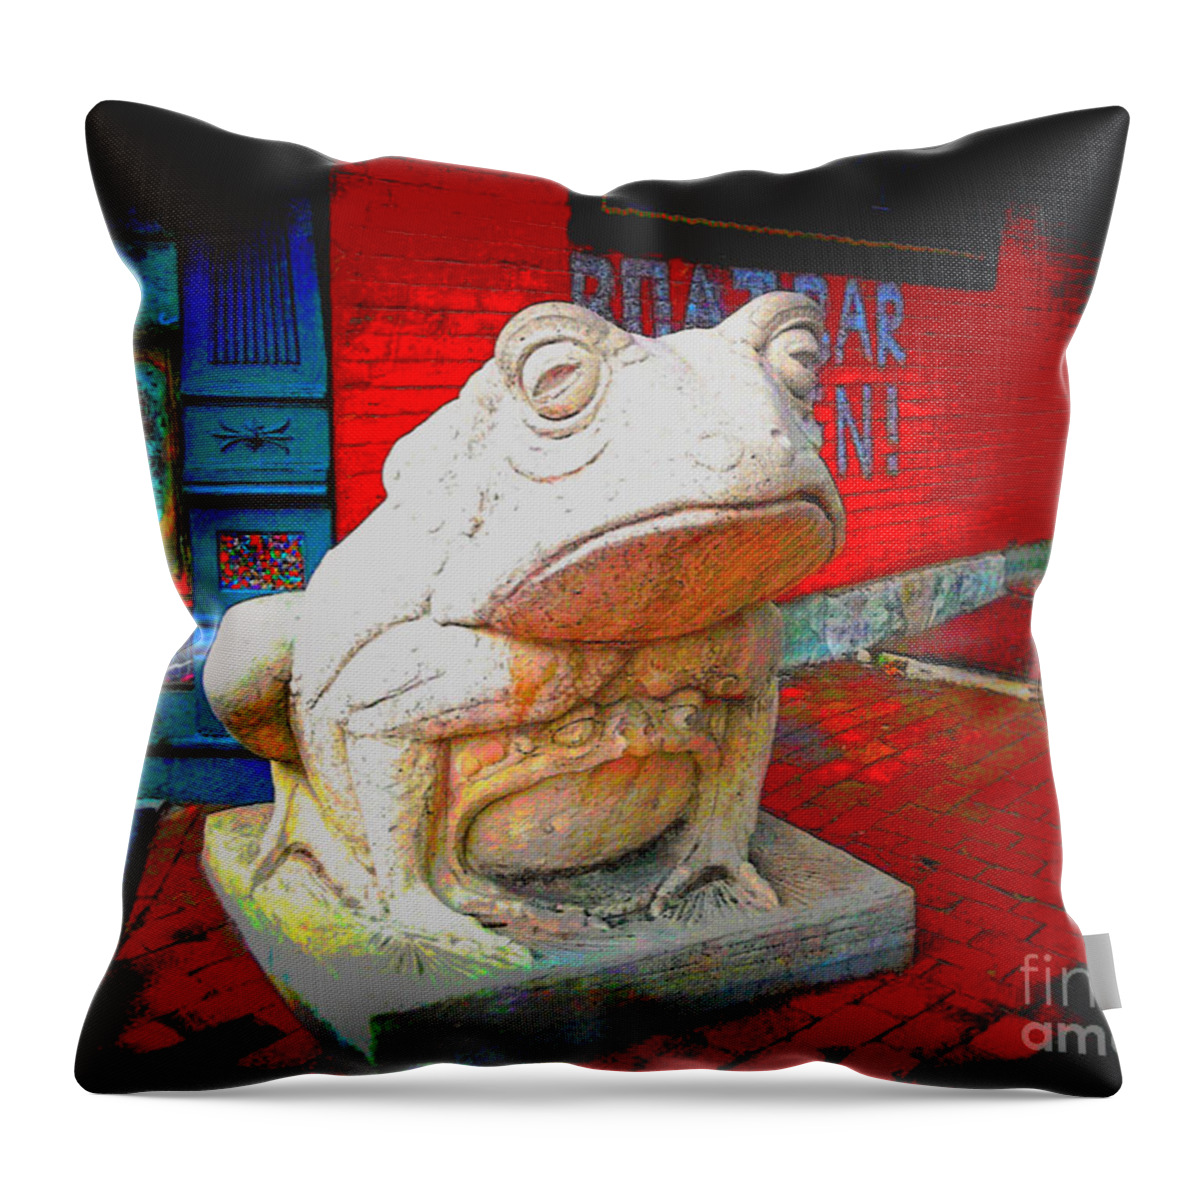  Throw Pillow featuring the photograph Bull Frog Painted by Kelly Awad